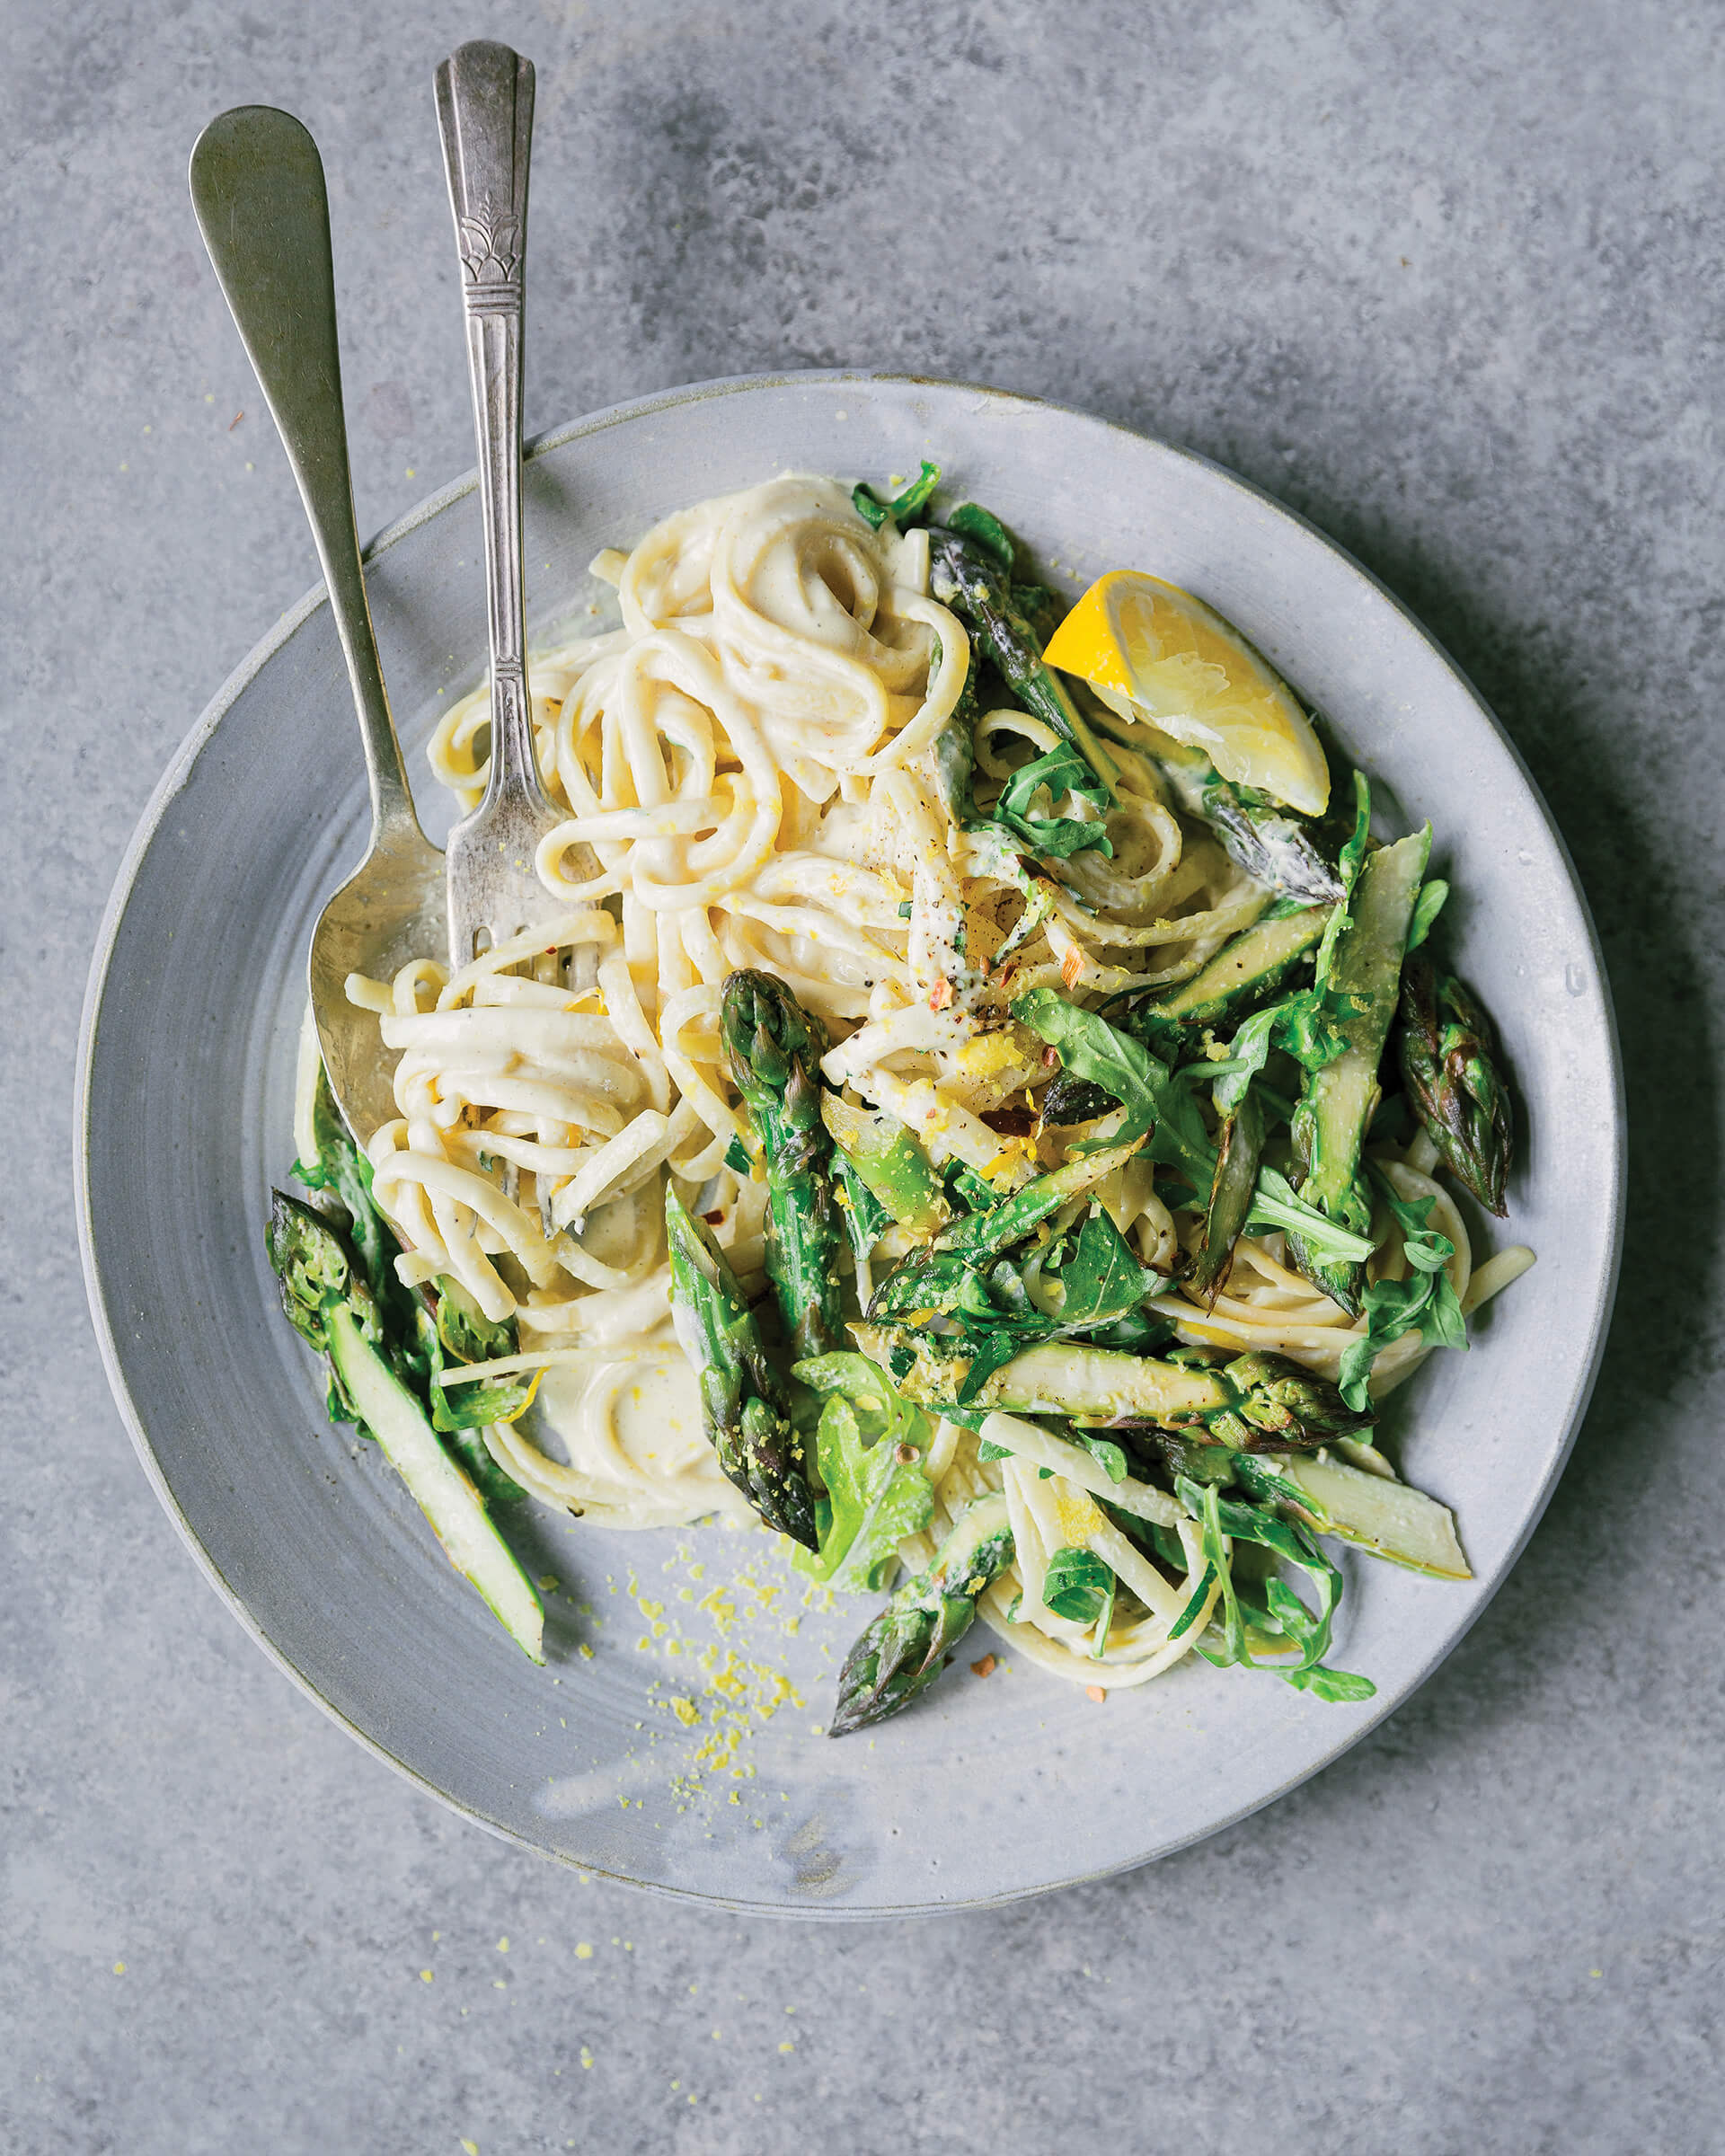 A plate of pasta and asparagus with cutlery.